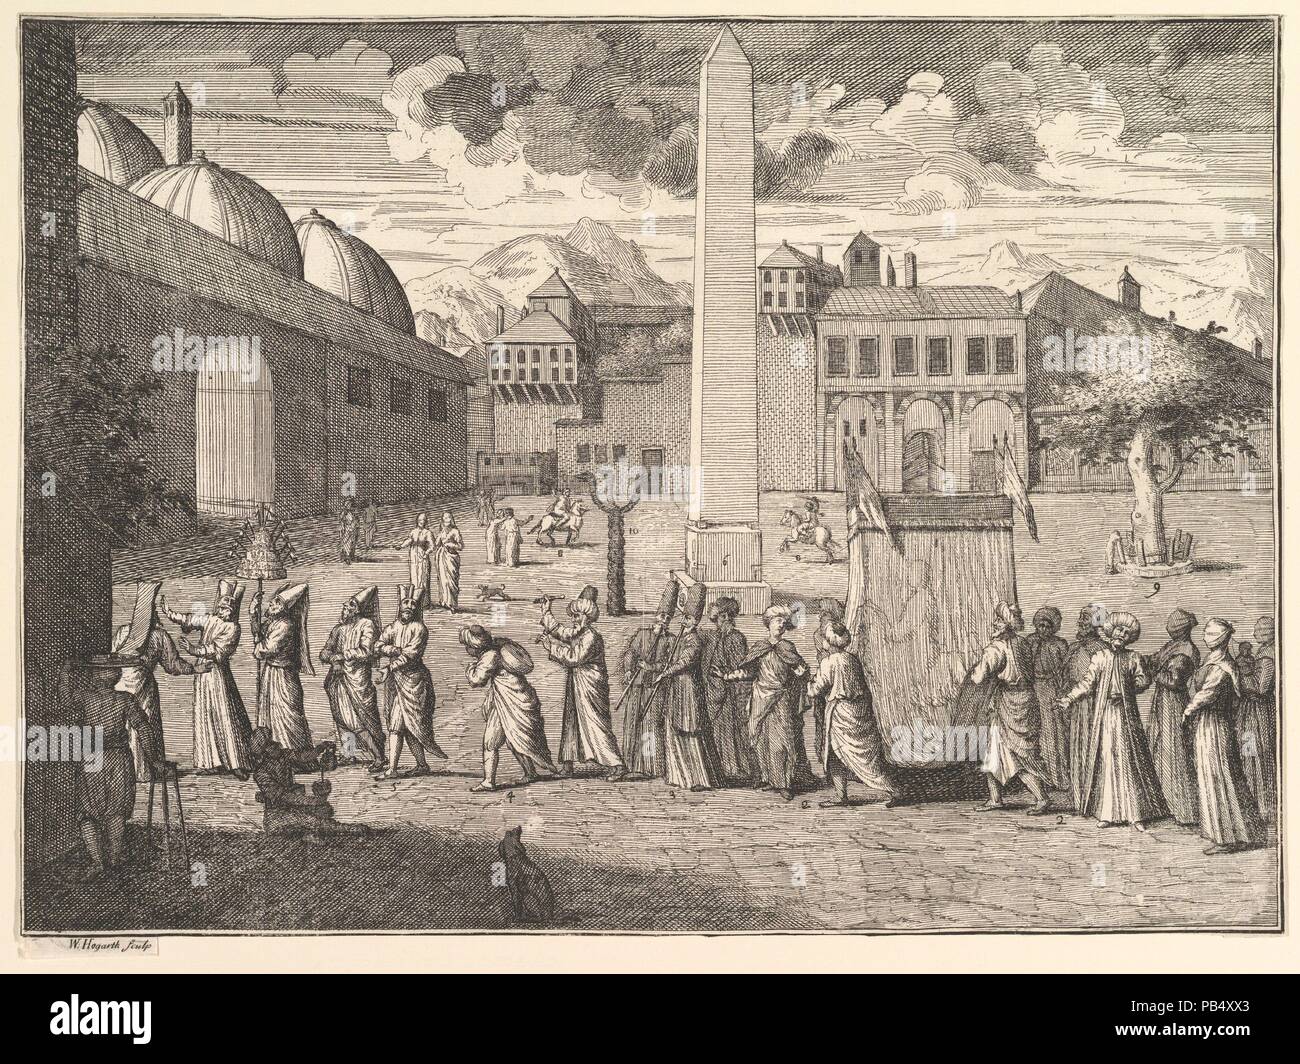 Procession through the Hippodrome, Constantinople (Aubry de La Mottraye's 'Travels throughout Europe, Asia and into Part of Africa...,'  London, 1724, vol. I, plate 15). Artist: After Jean Baptiste Vanmour (French, Valenciennes 1671-1737 Istanbul). Author: Illustrates Aubry de La Mottraye (French, 1674-1743). Dimensions: sheet: 9 13/16 x 13 7/16 in. (24.9 x 34.1 cm). Etcher: William Hogarth (British, London 1697-1764 London). Date: 1723-24. Museum: Metropolitan Museum of Art, New York, USA. Stock Photo